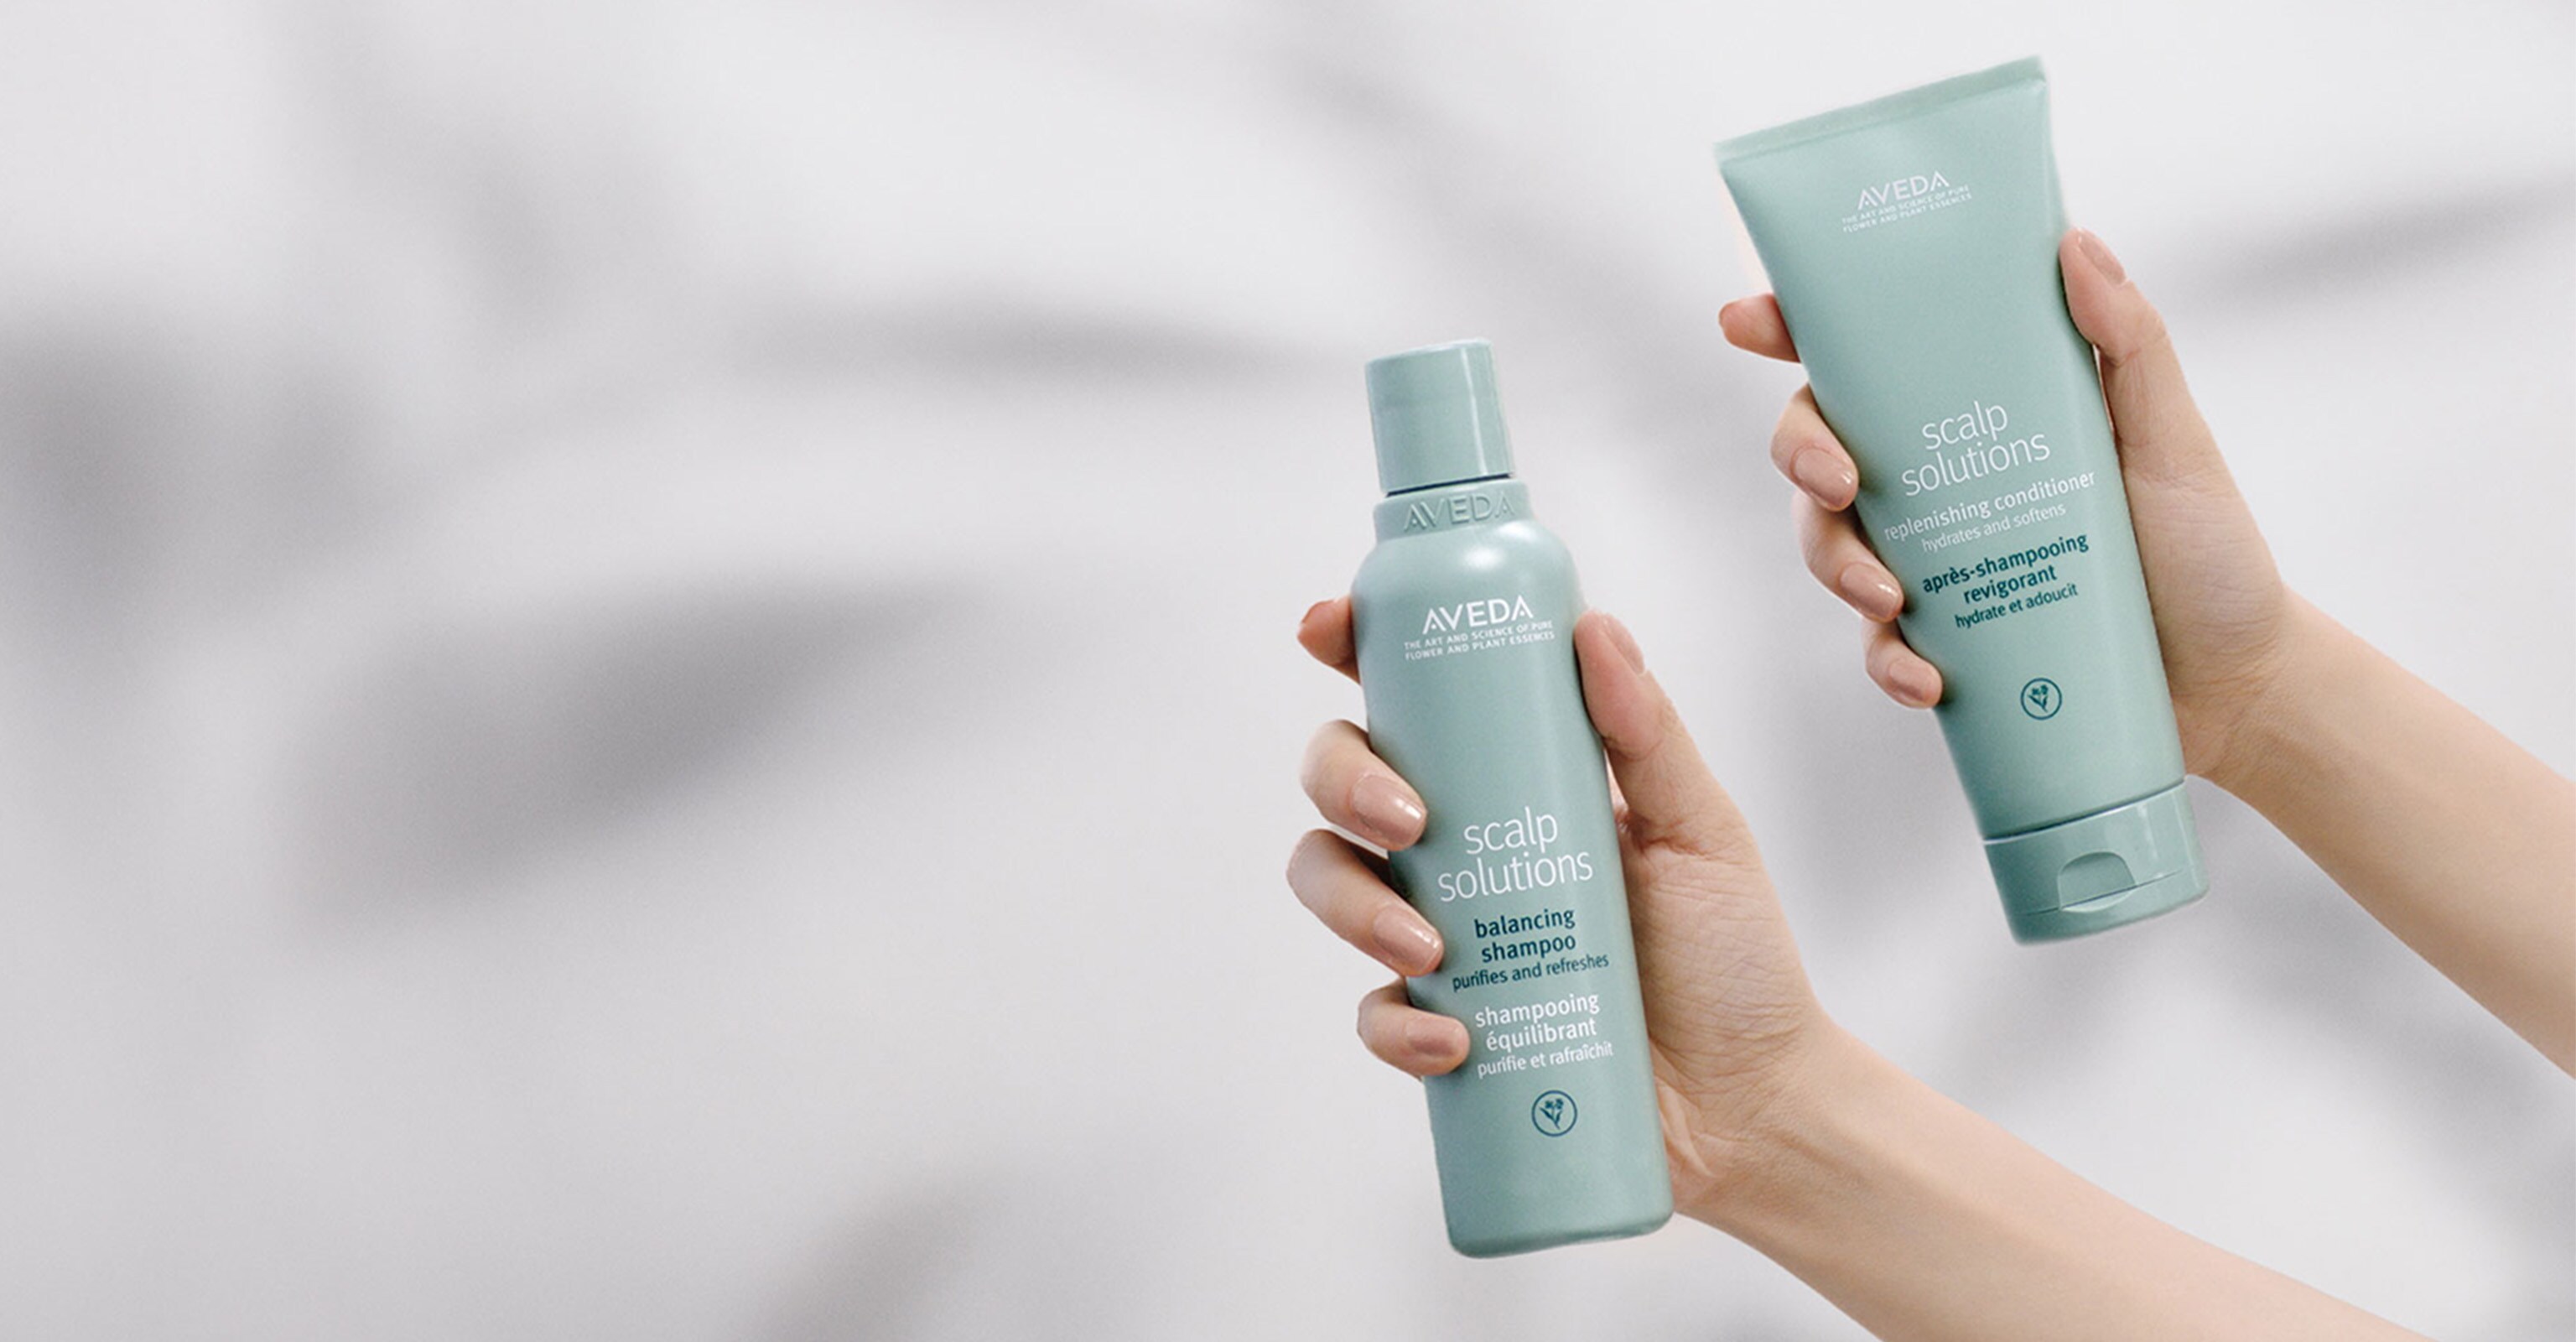 scalp solutions balancing shampoo and replenishing conditioner hydrates scalp +92% after 1 week.